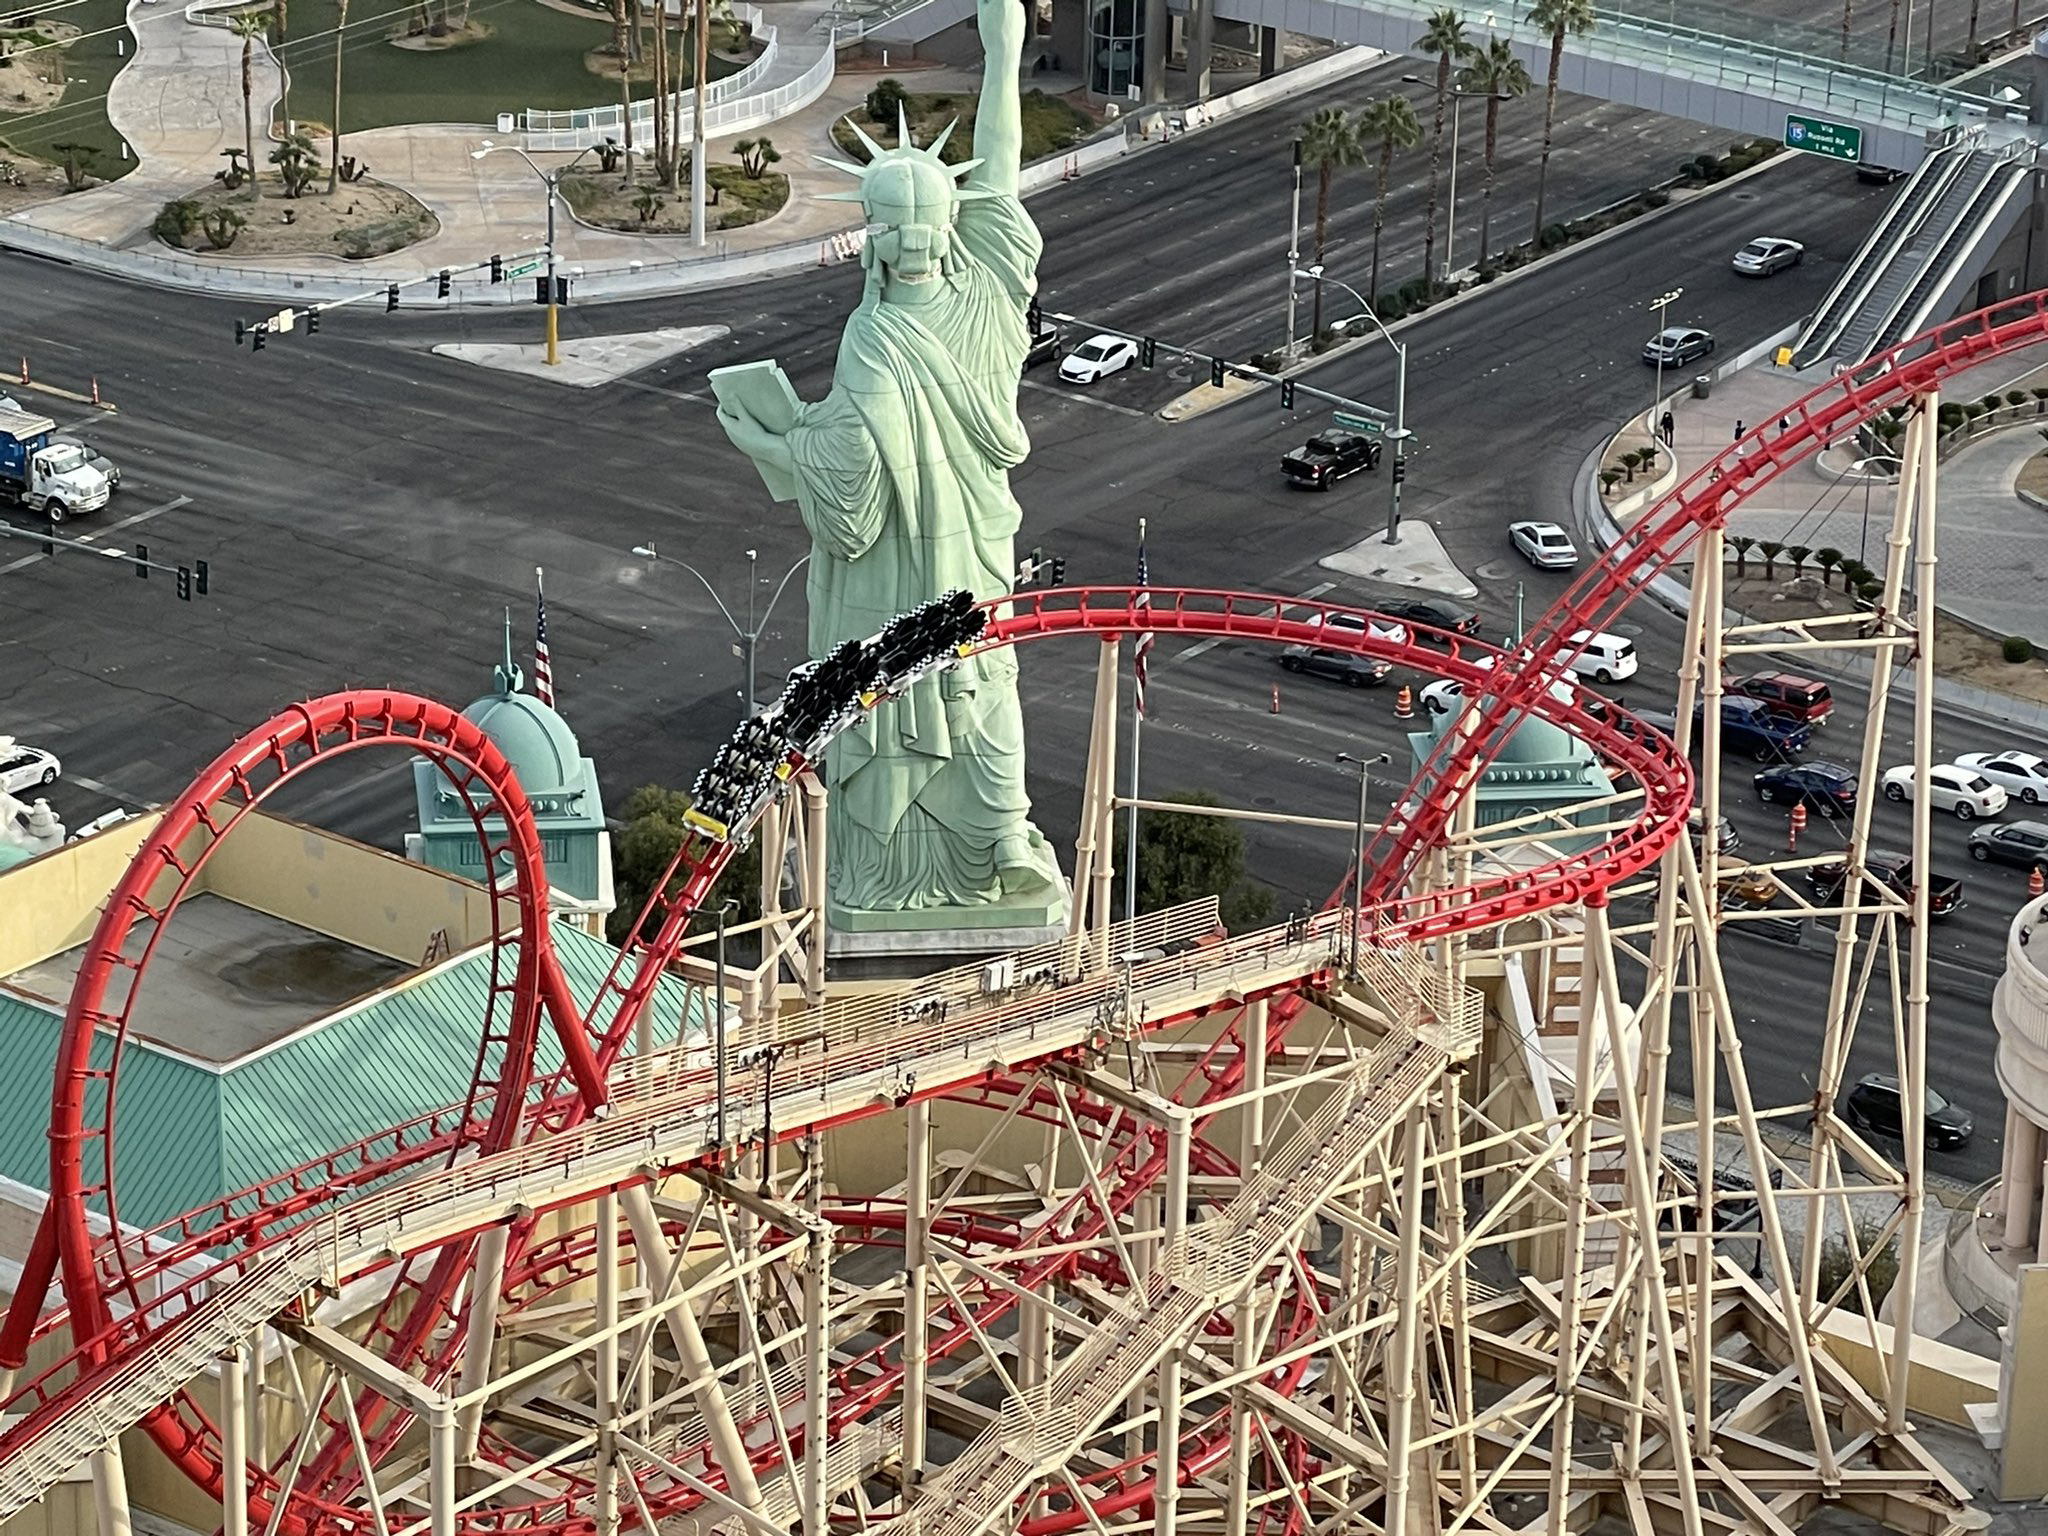 The Roller Coaster at New York-New York